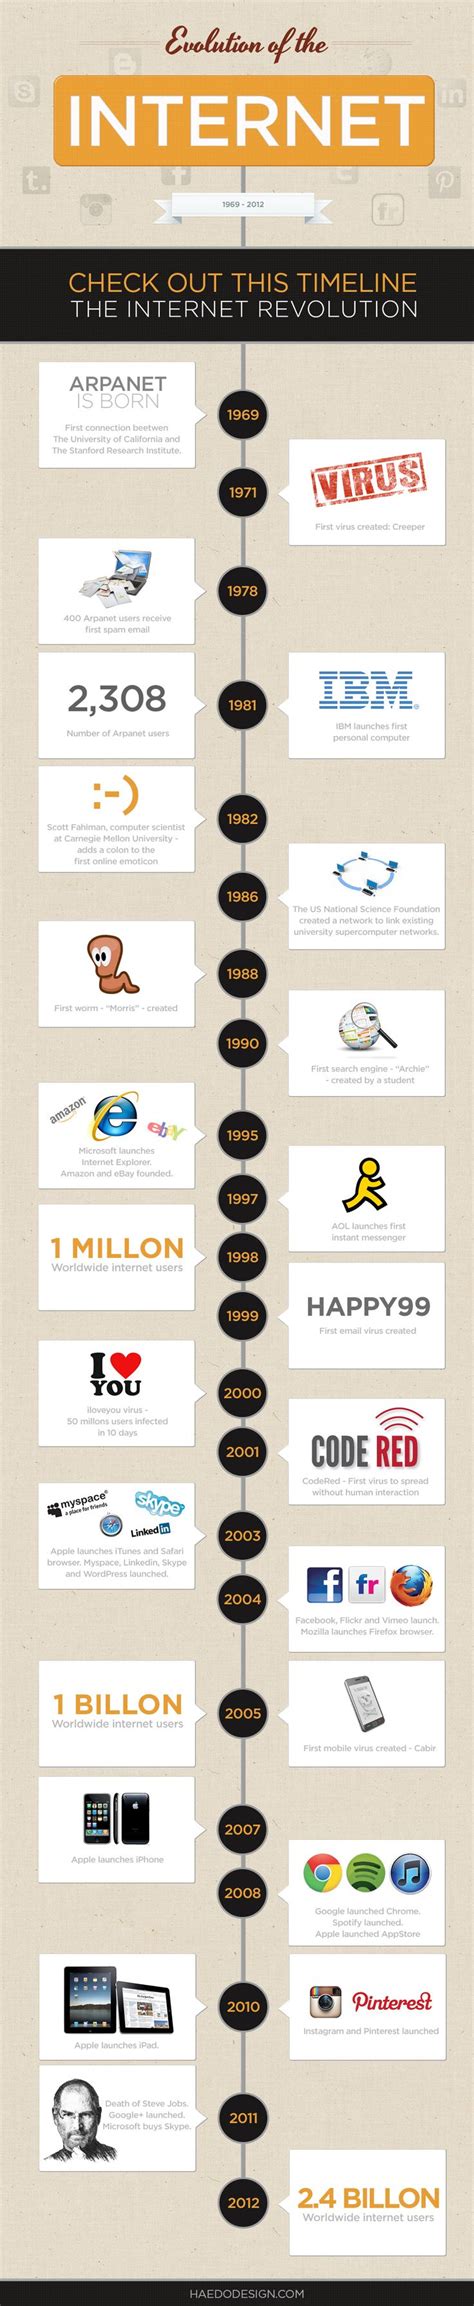 This Is A Brief Guide To The History Of The Internet Follow The